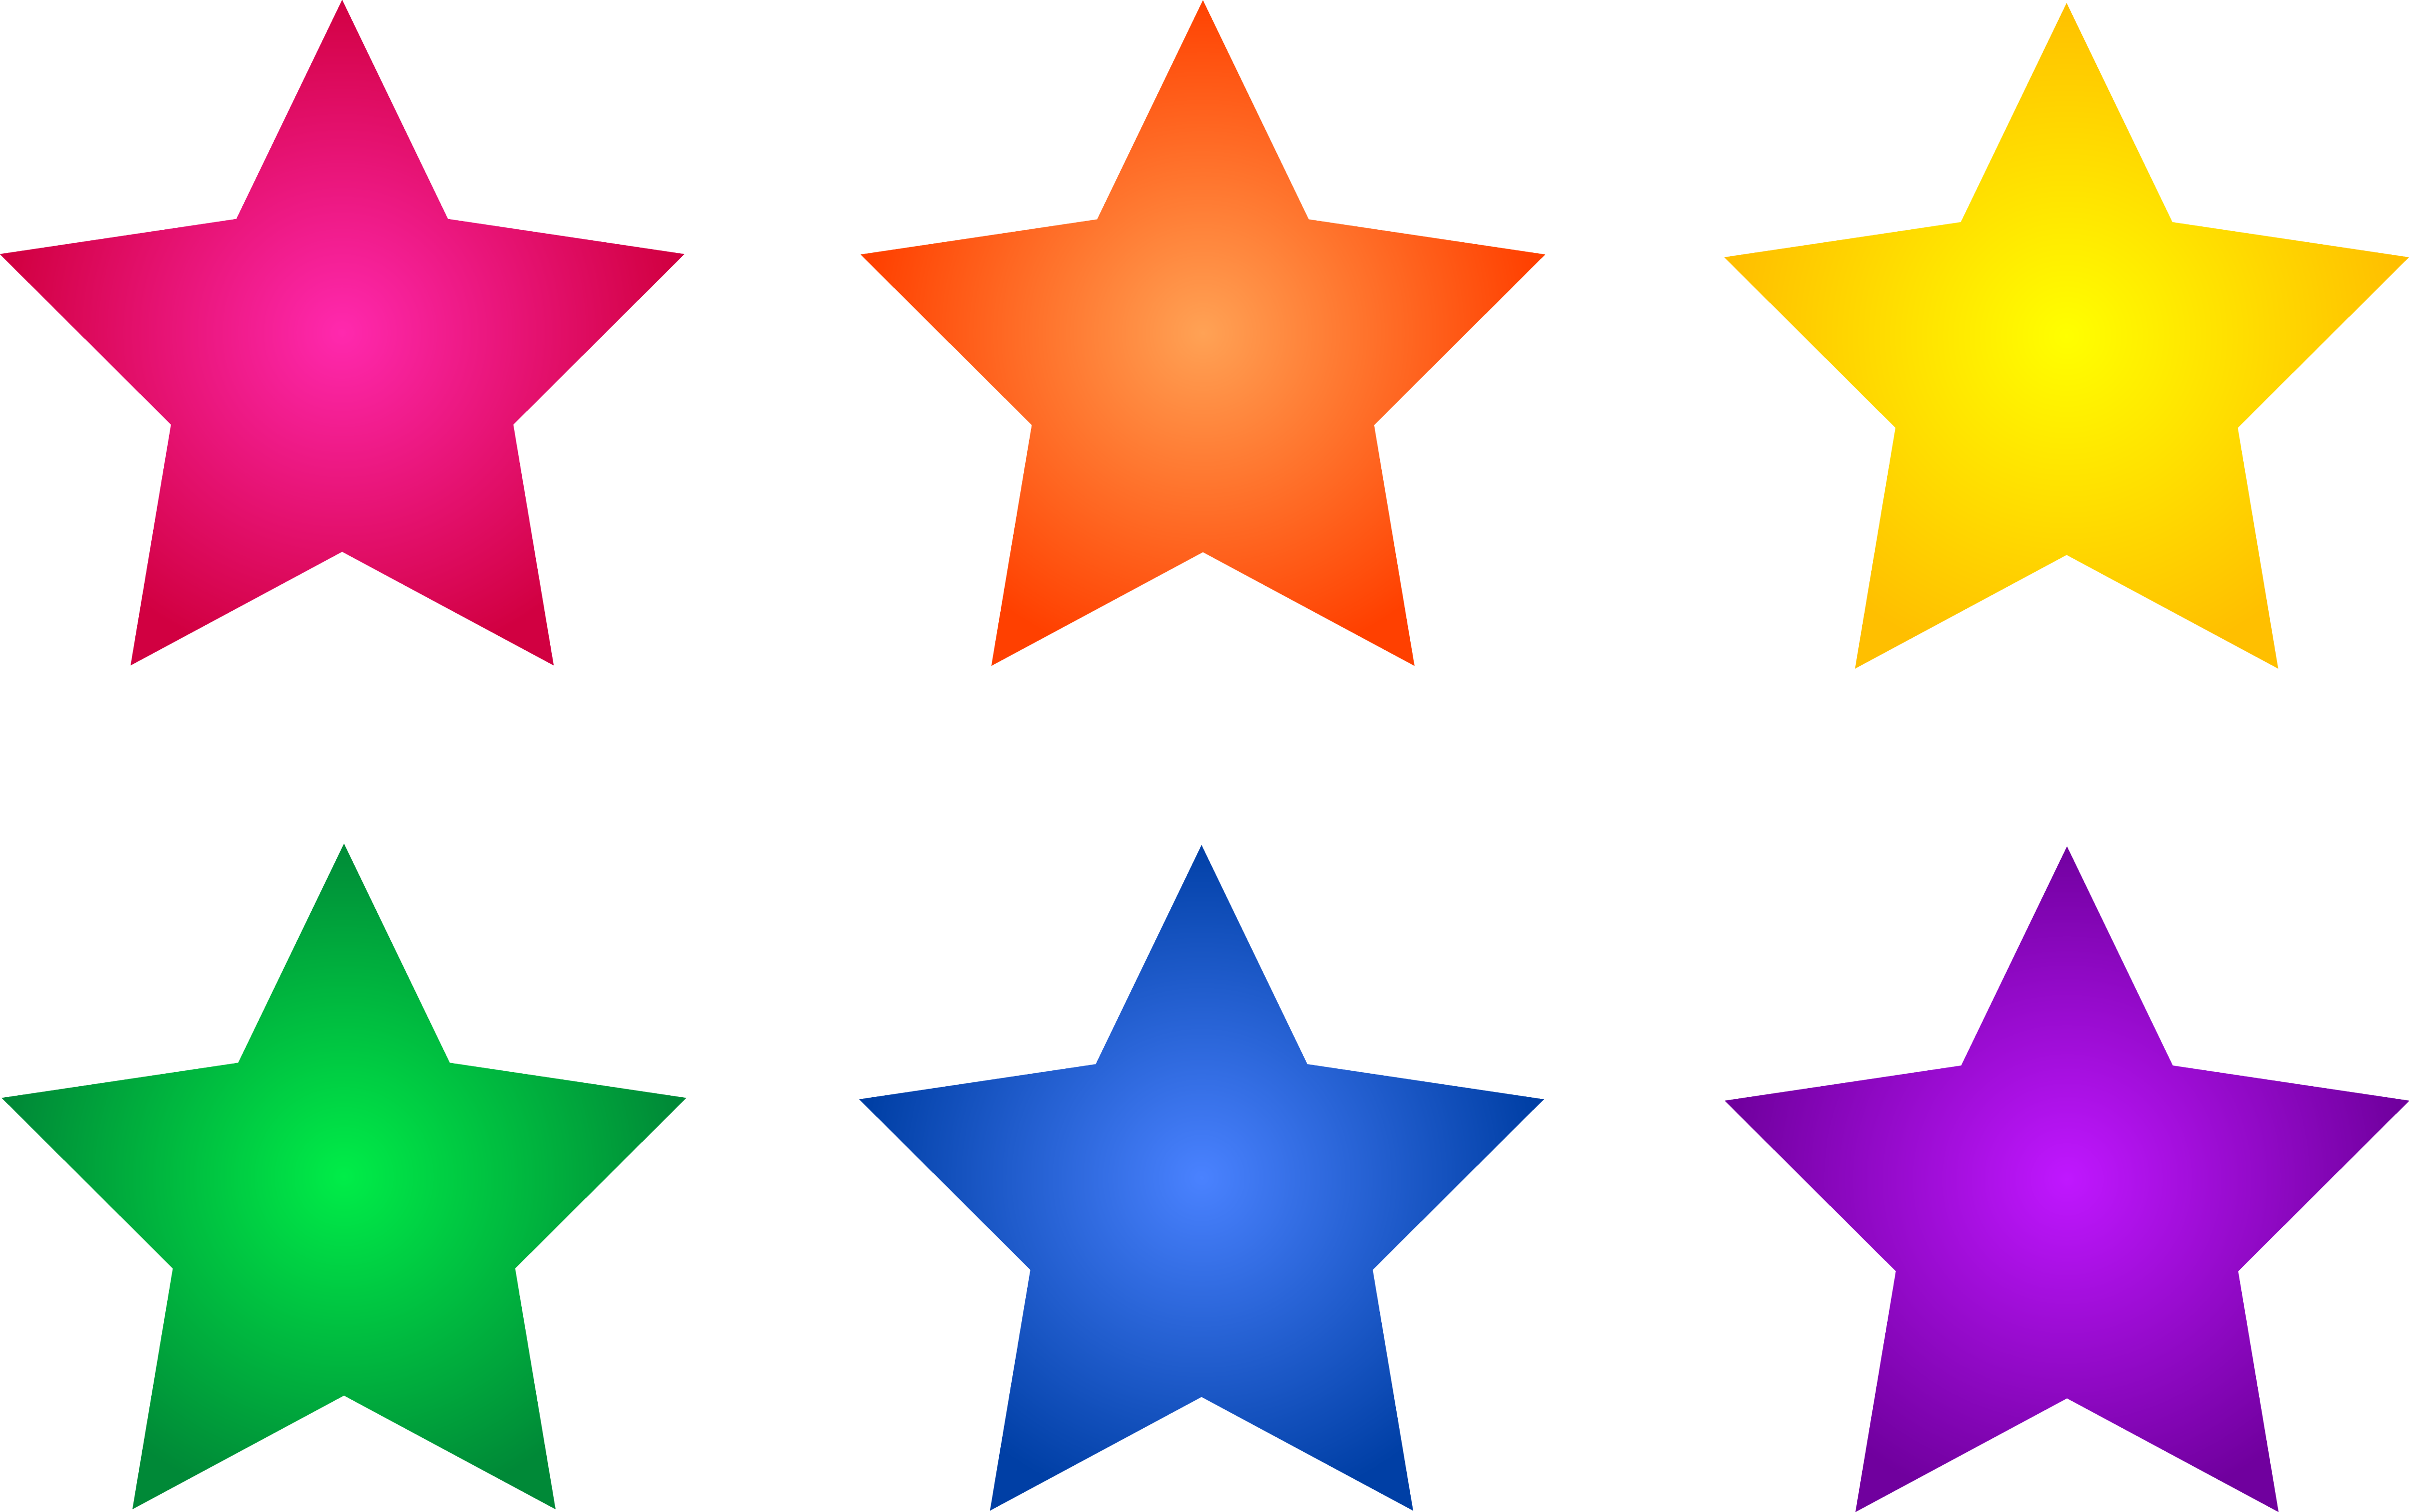 Stars pictures clip art